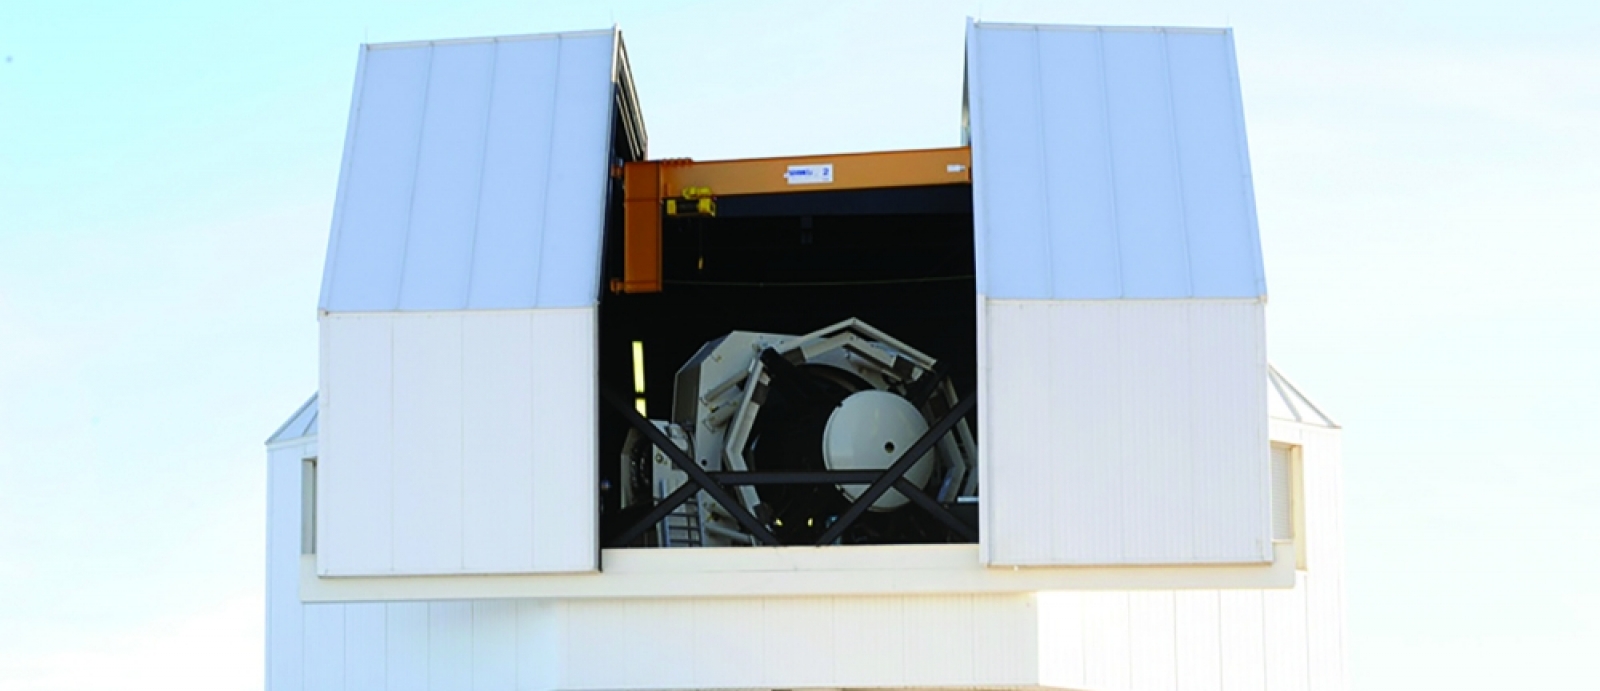 An image of the telescope of the SST